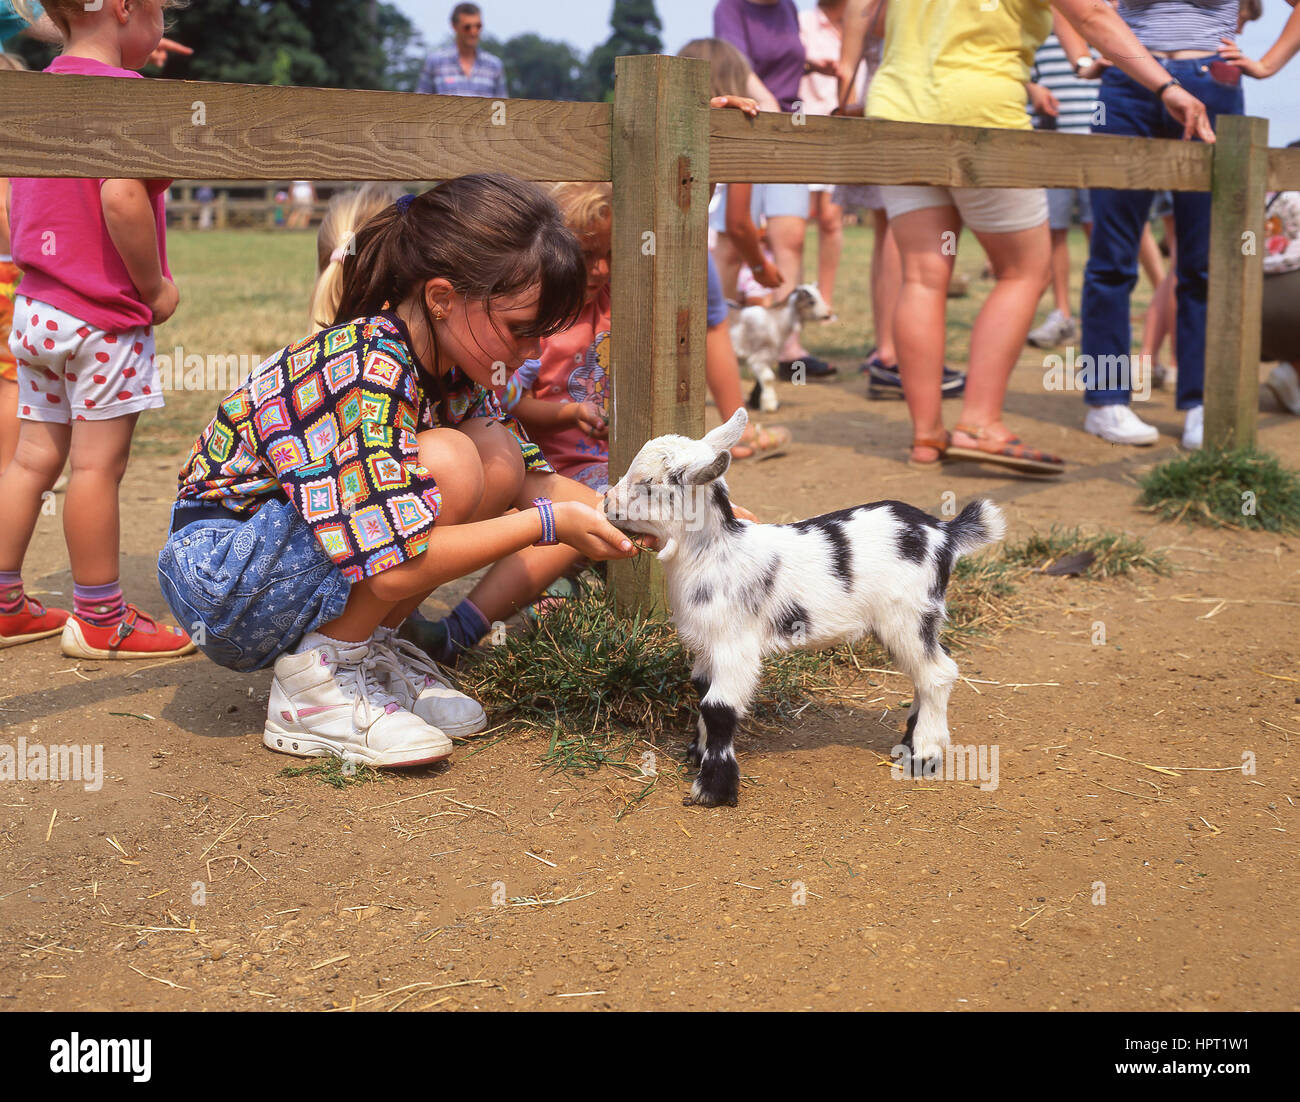 Young girl feeding baby goat in Children's Farmyard, Cotswold Wildlife Park & Gardens, Burford, Wiltshire, England, United Kingdom Stock Photo